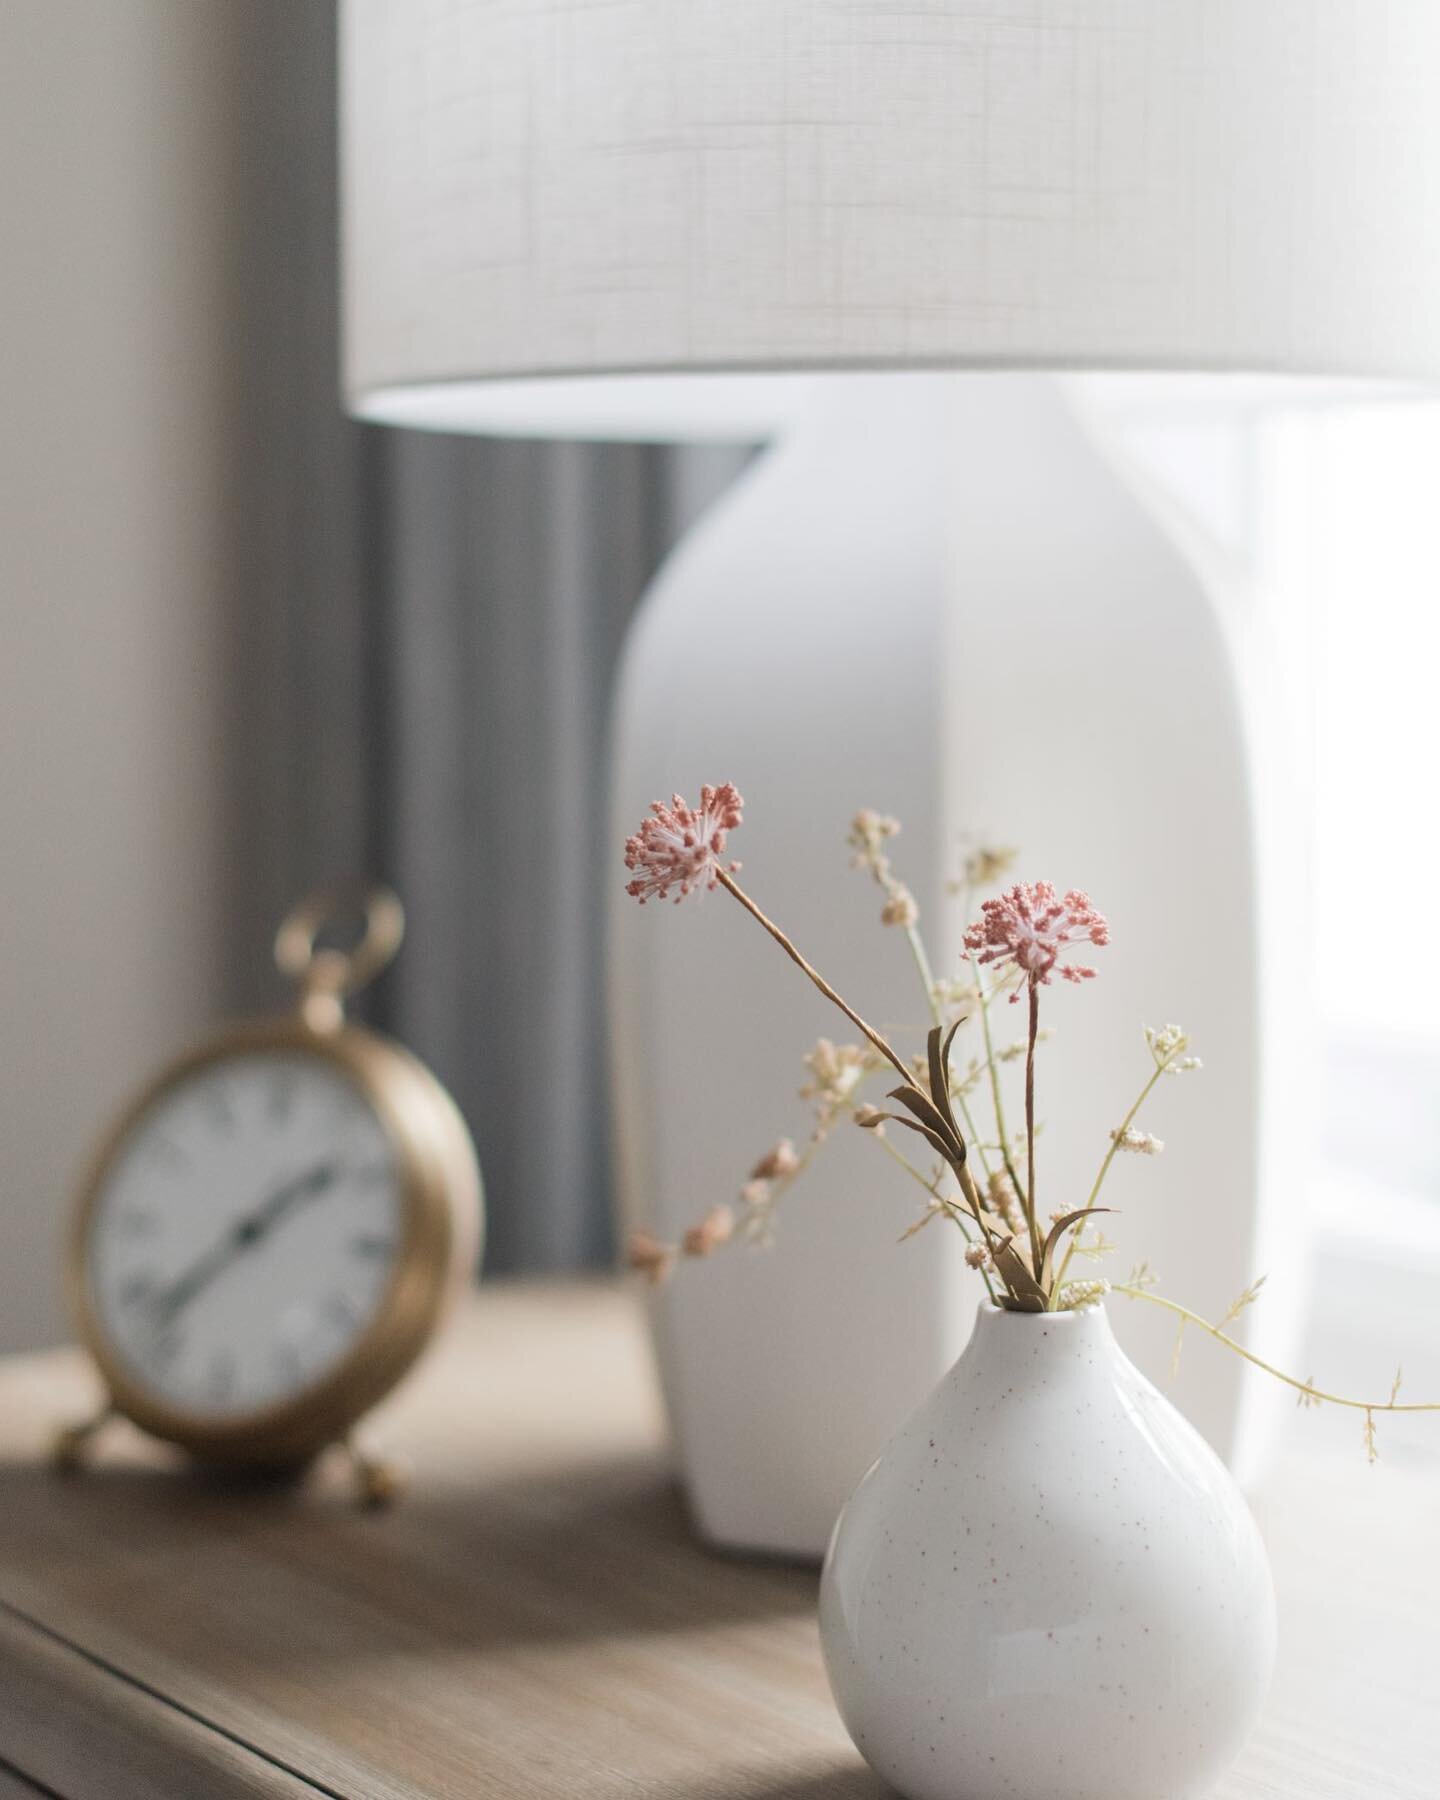 Sometimes all you need is a little bit of styling to pull it all together.⏰
. 
.
.
.
#styling #decor #homedecor #homedecorideas #homedecoration #homedesign #interiordesign #interiordesigner #designideas #designinspo #designinspiration #interiorstylin